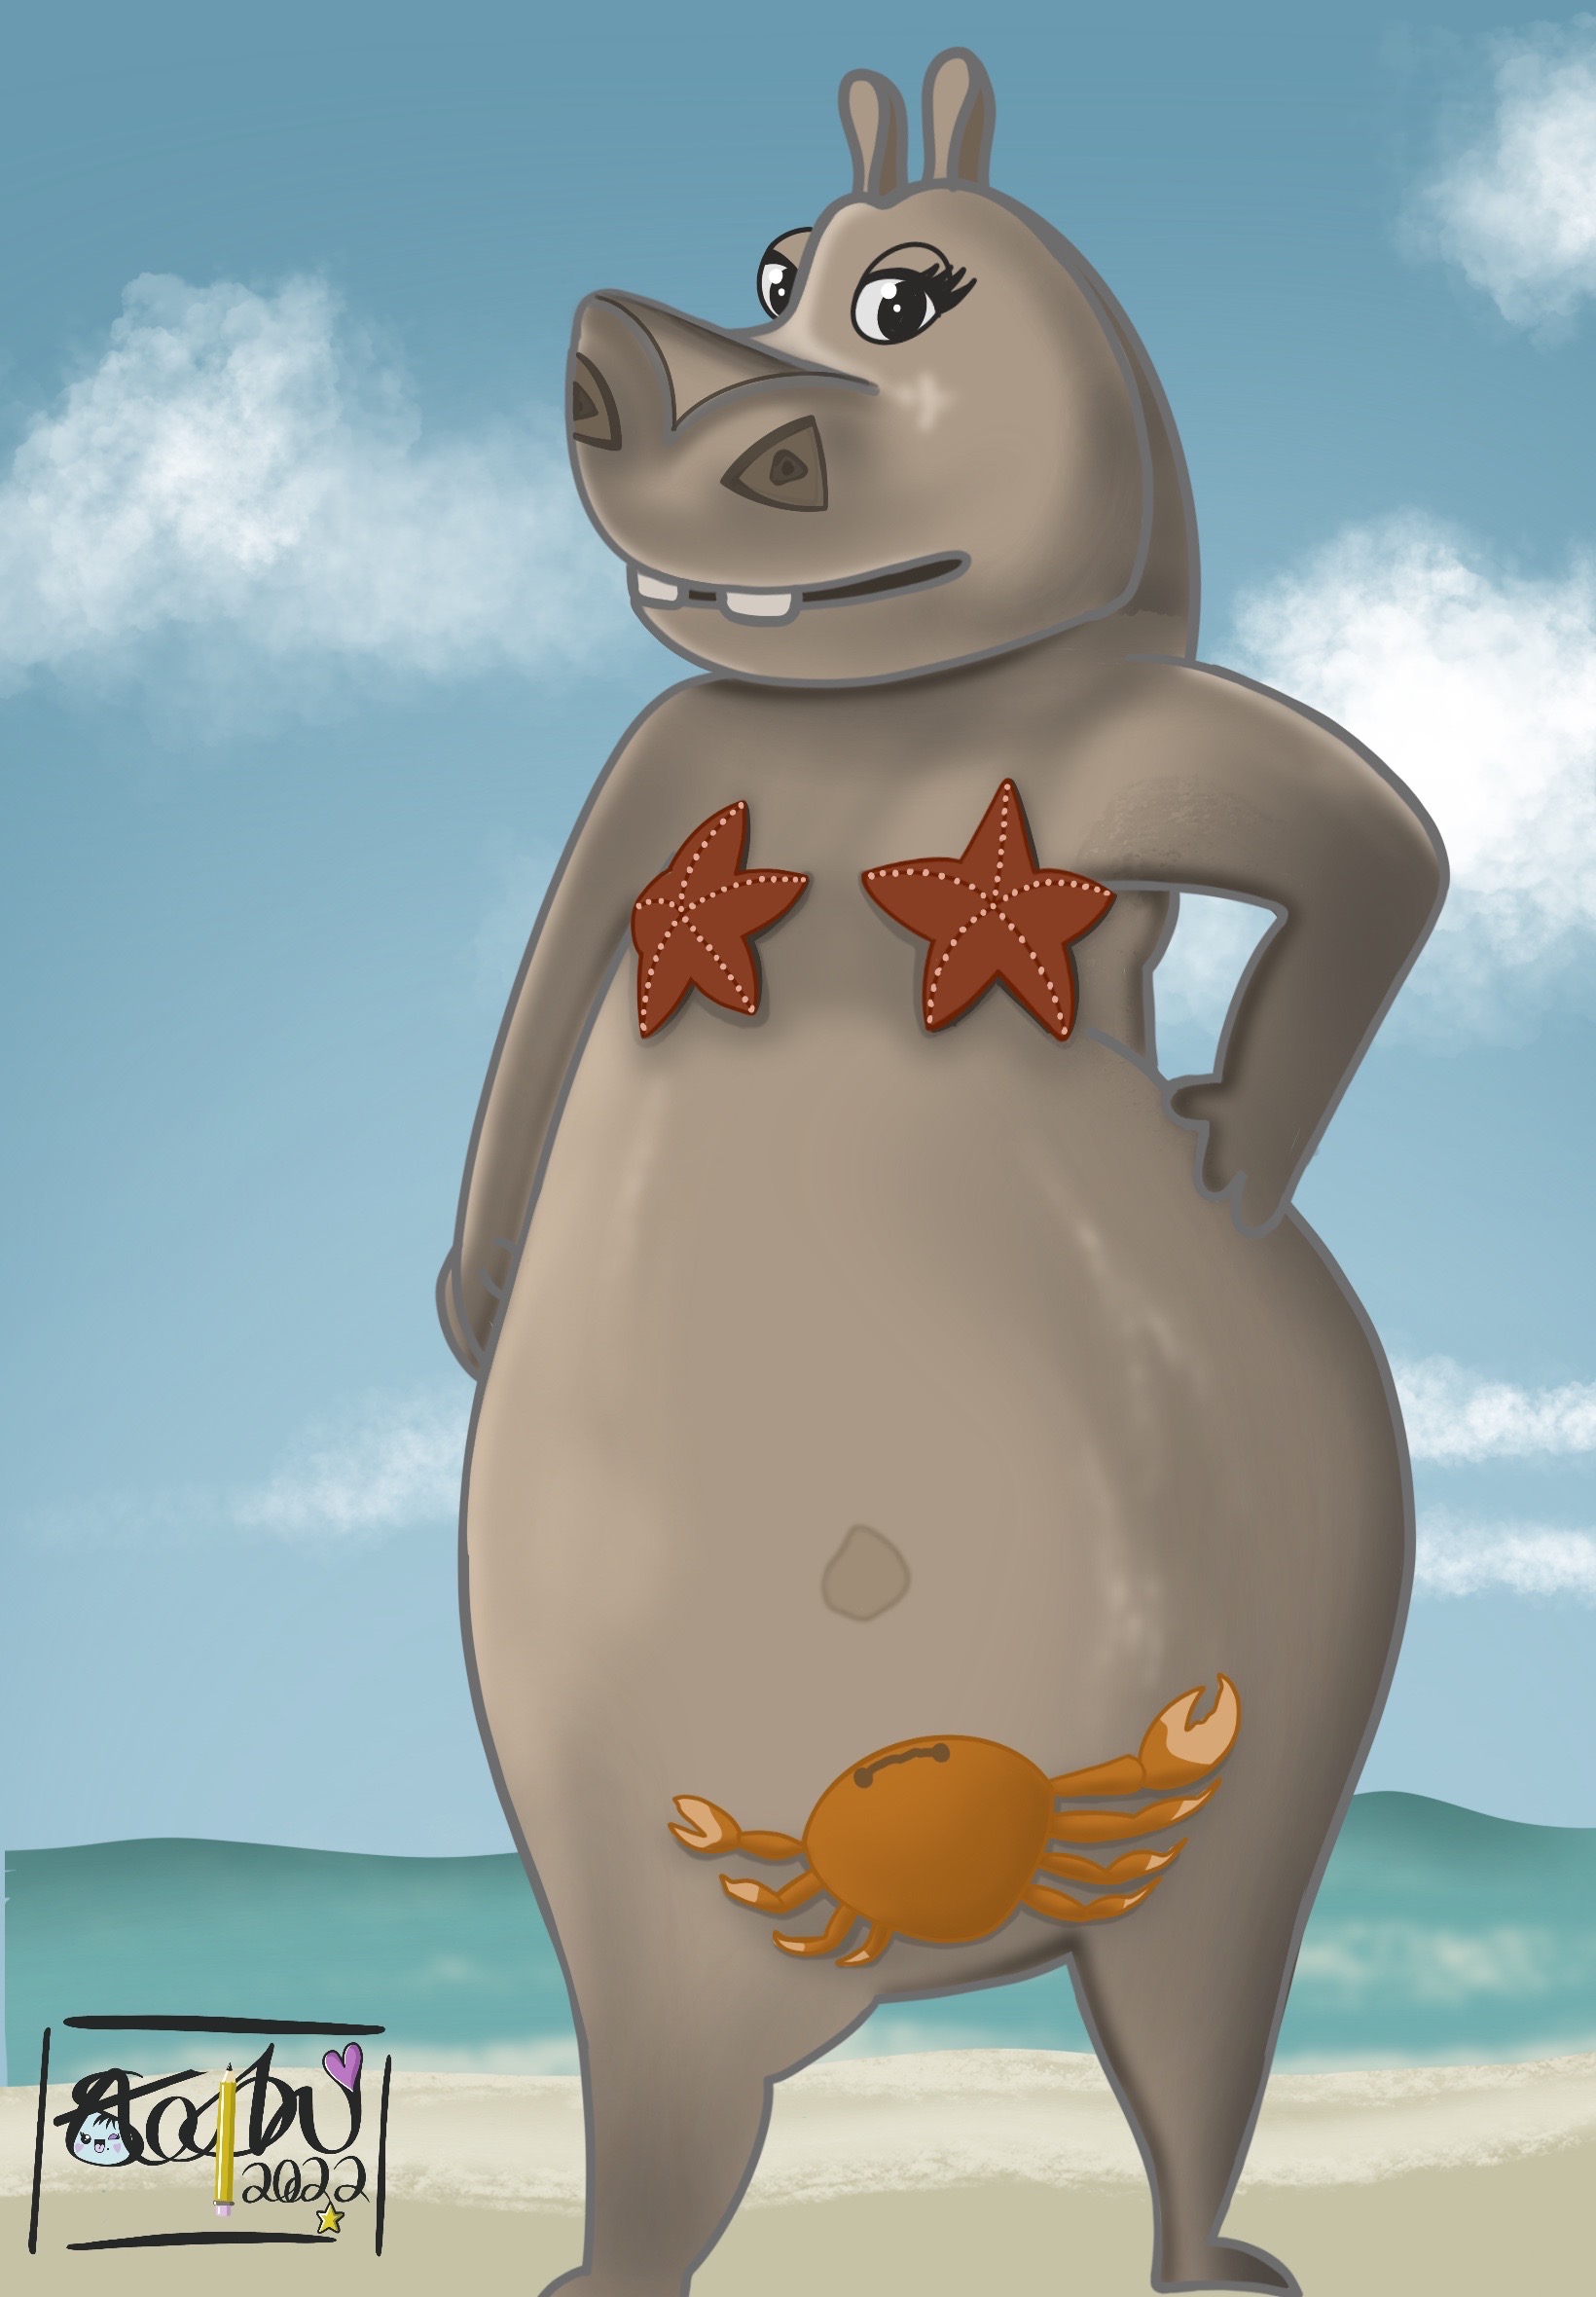 Gloria the hippo from Madagascar by StephDraws40 on DeviantArt